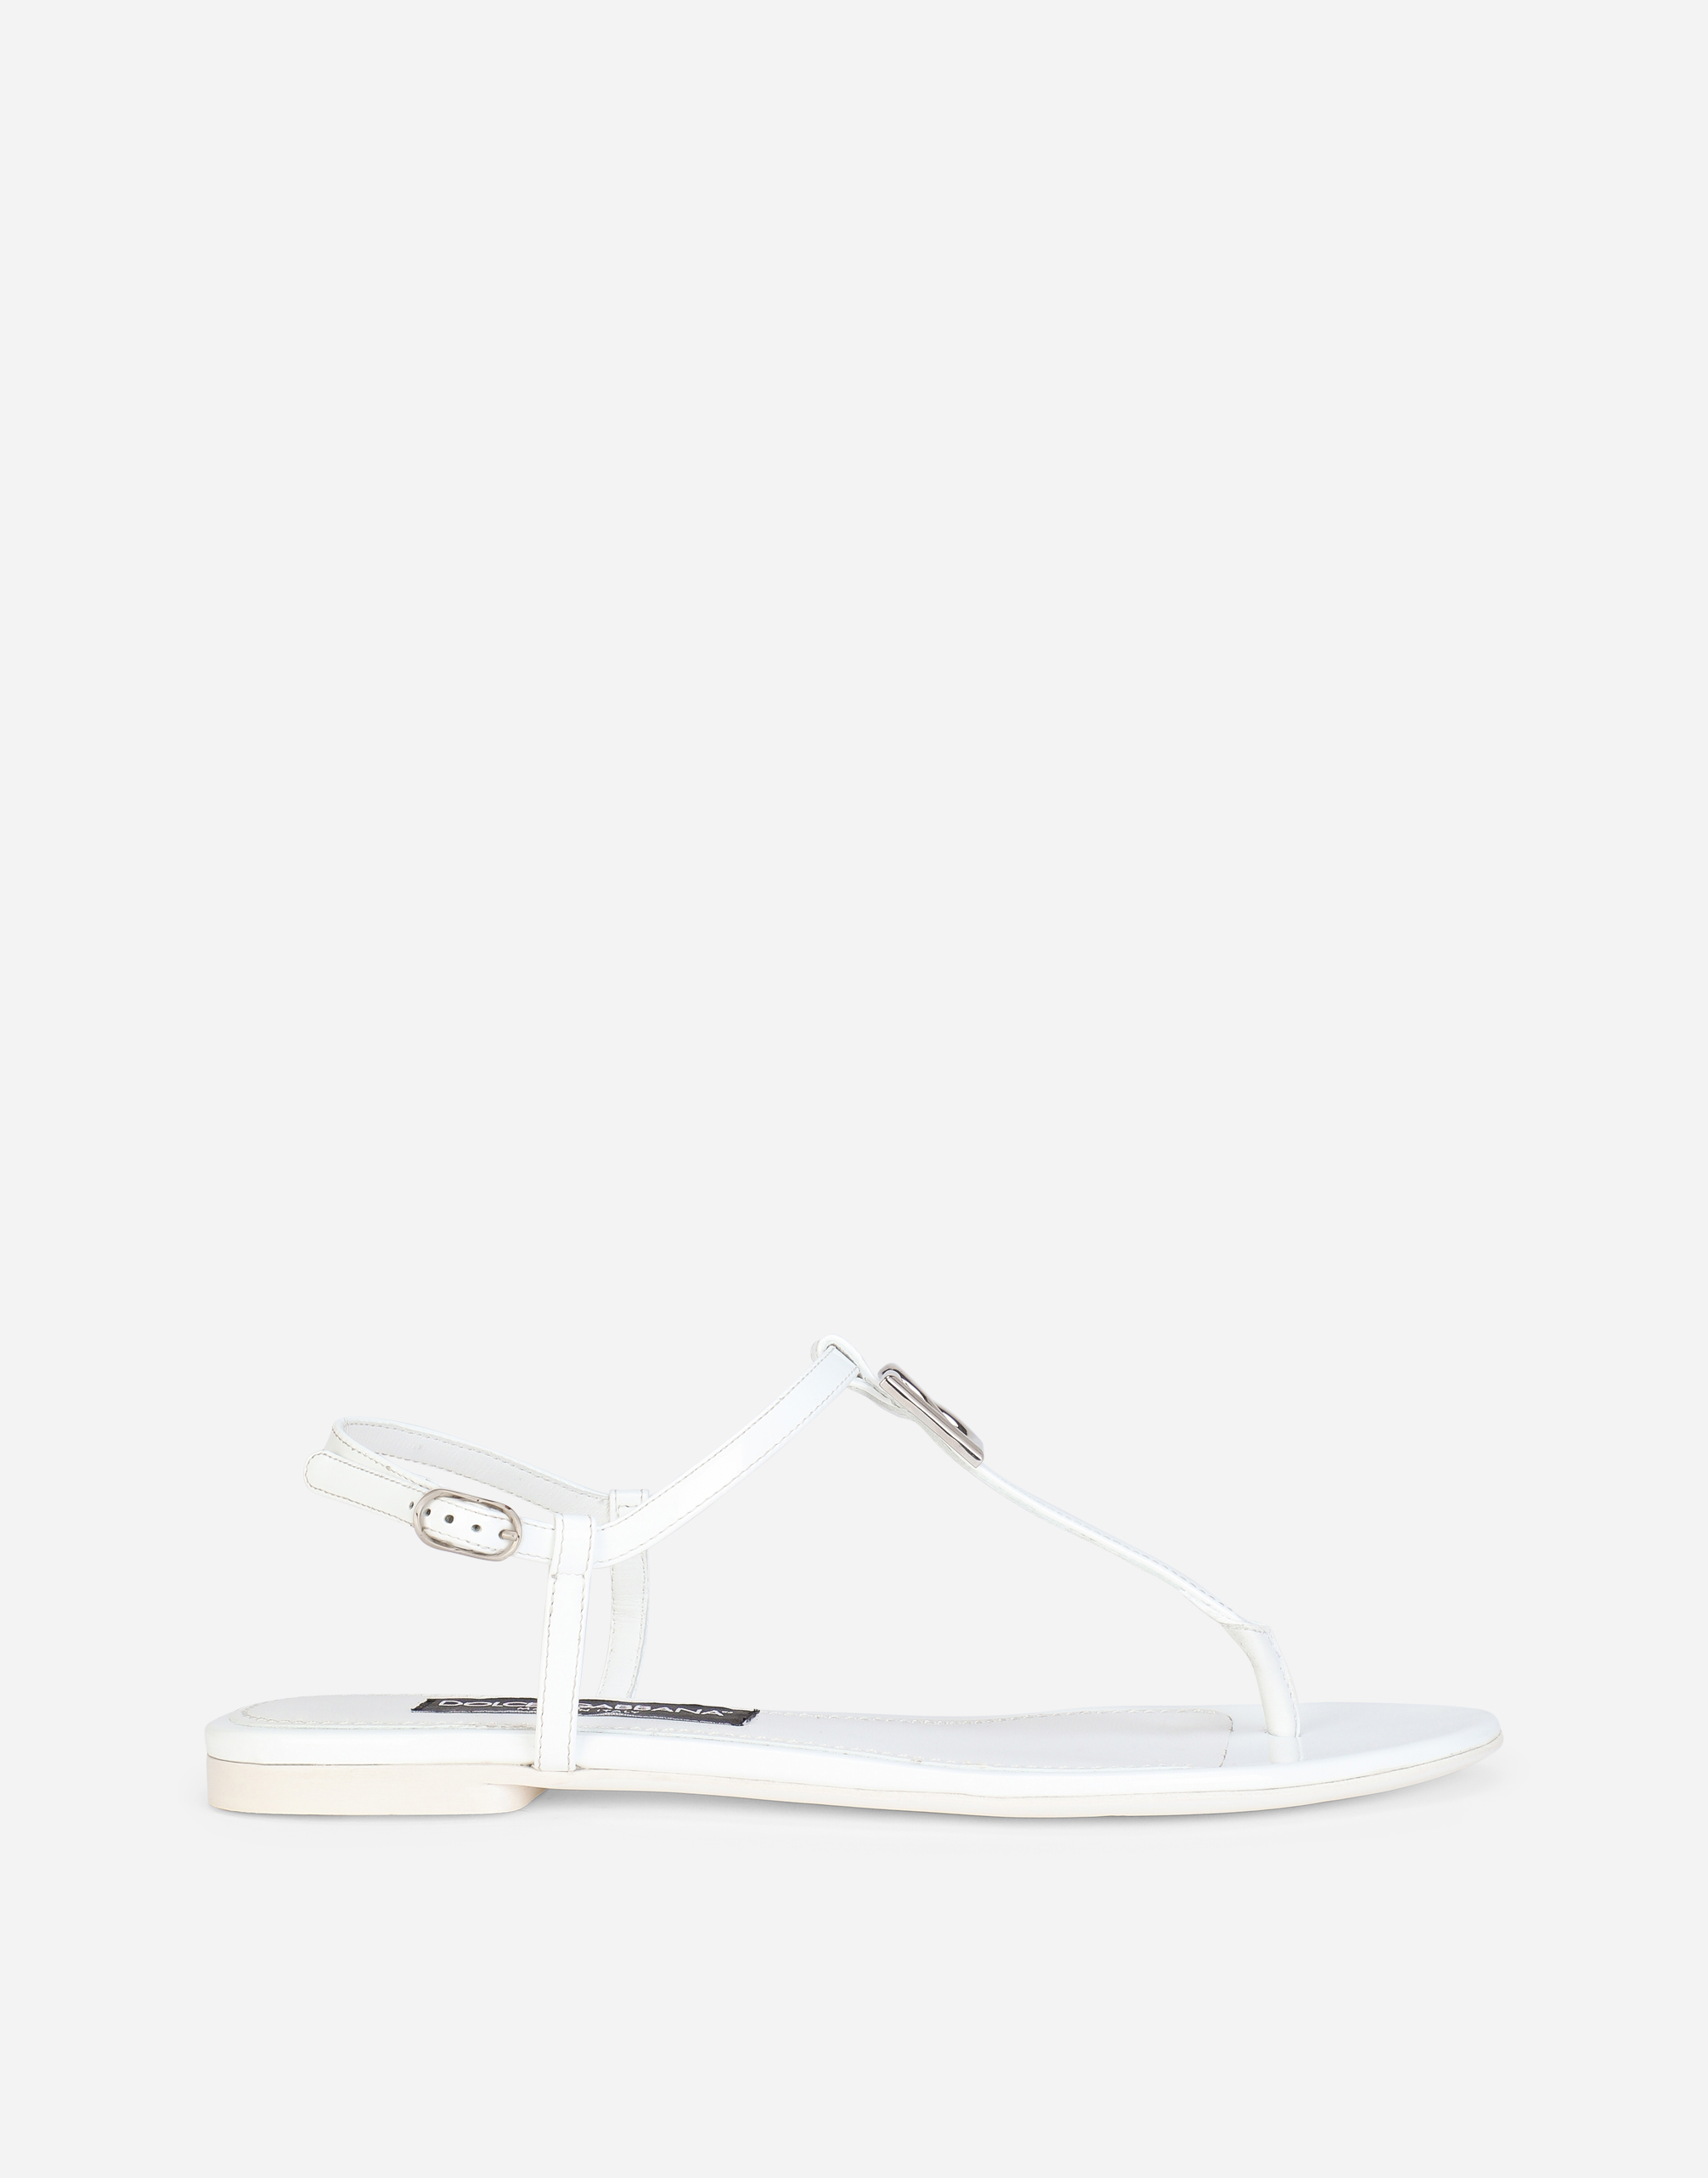 Patent leather DG thong sandals in White